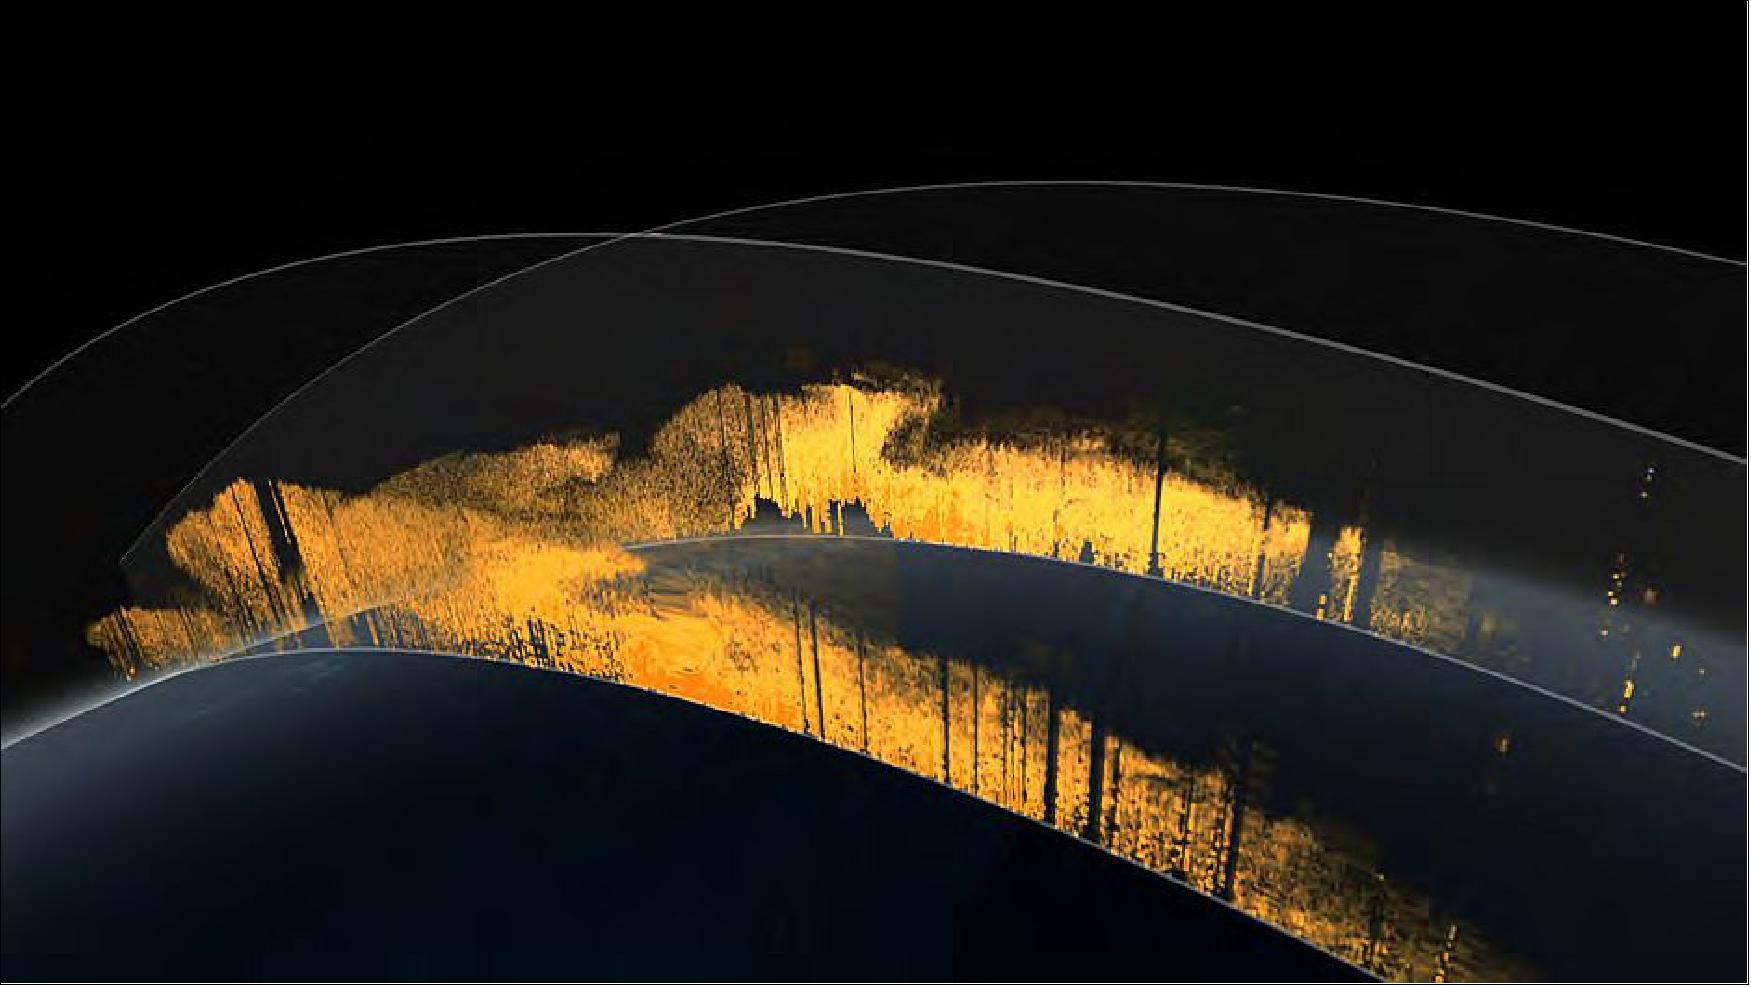 Figure 19: An example of a cross-section, or “curtain,” of data from the CALIOP instrument aboard the CALIPSO satellite, which sends out pulses of light that bounce off particles in the atmosphere and back to the satellite. CALIOP can distinguish dust from other particles based on optical properties (image credit: NASA’s Scientific Visualization Studio)